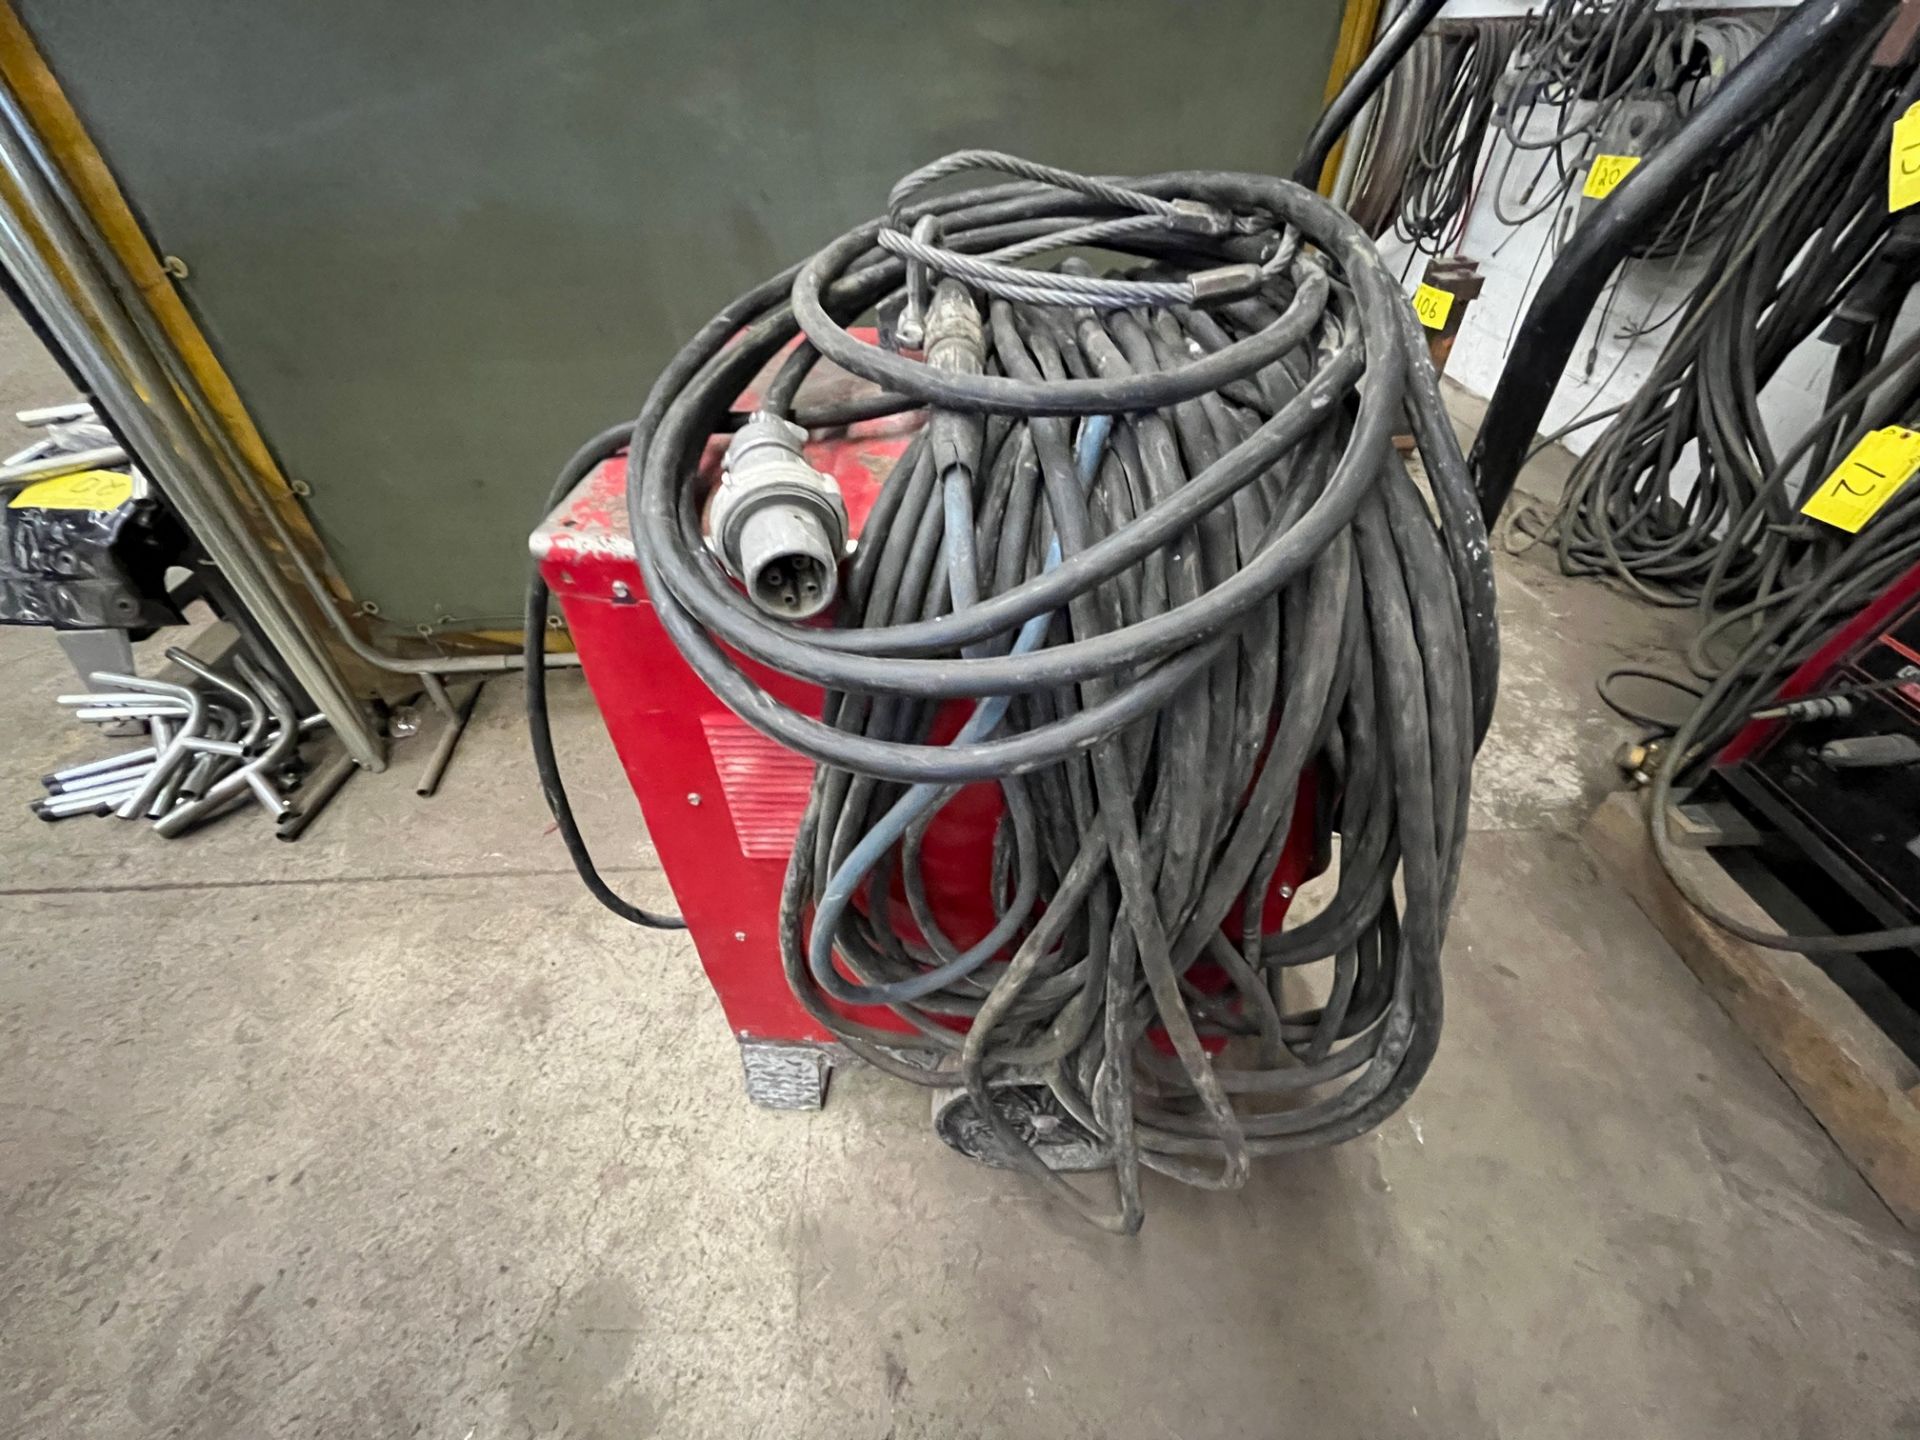 LINCOLN ELECTRIC IDEAL ARC 250 MIG WELDER W/ CART, CABLES (NO TANKS) - Image 3 of 6